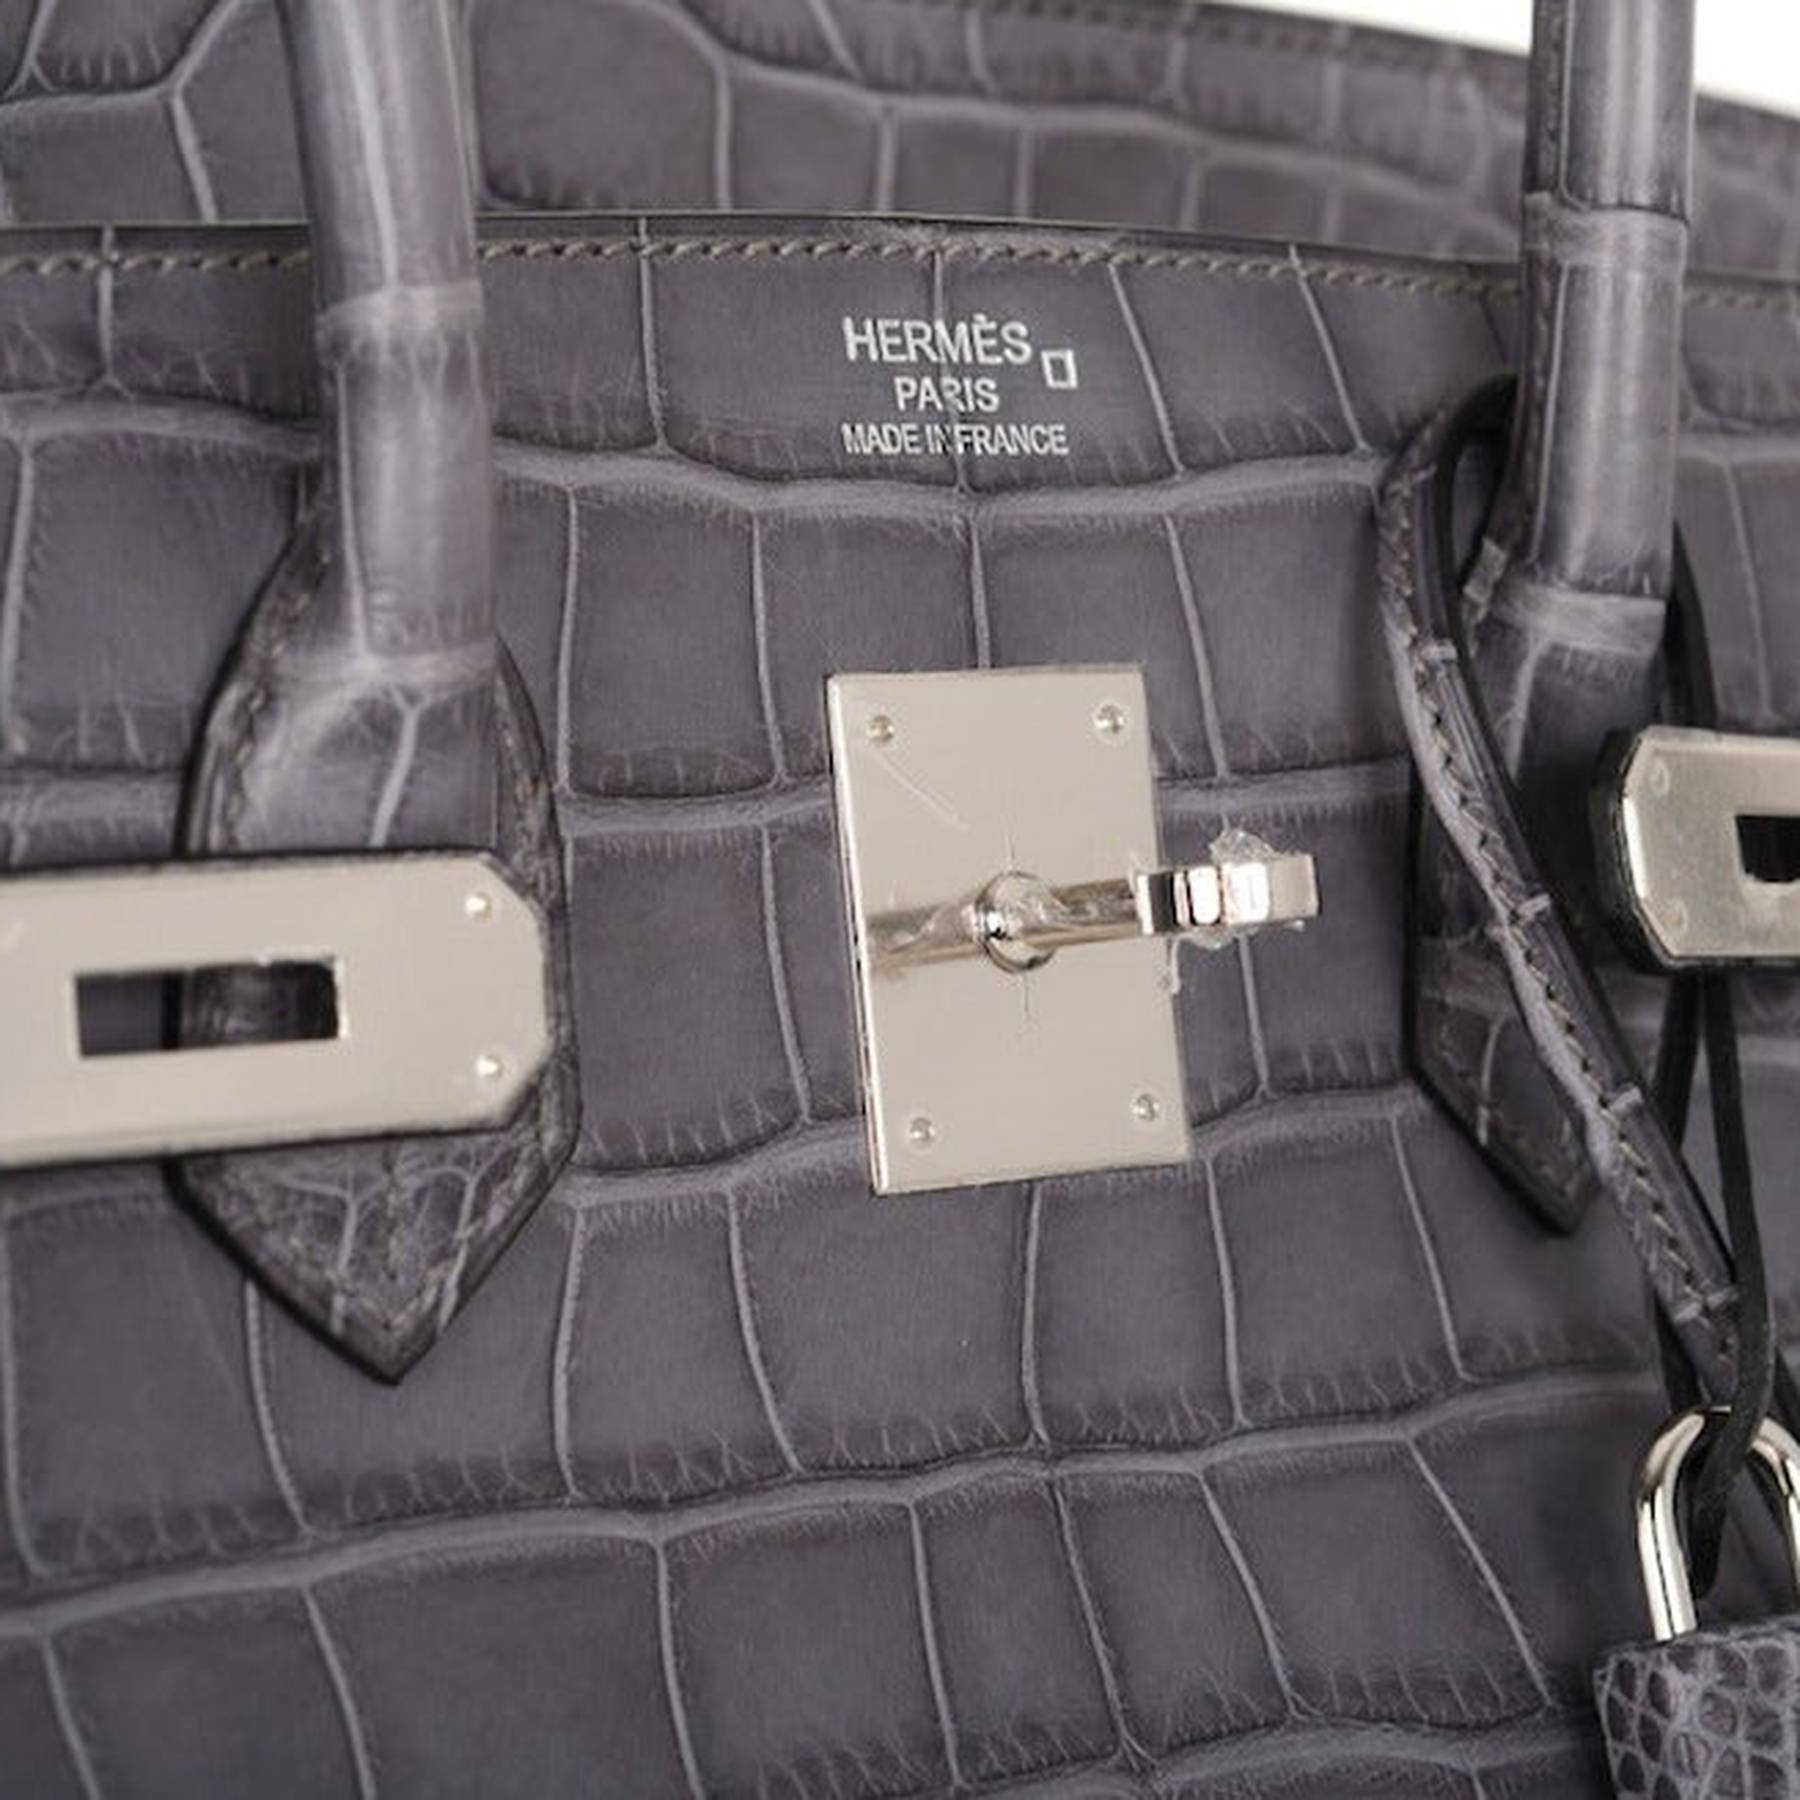 Birkin 40, why it is the bag size of the year and a good buy